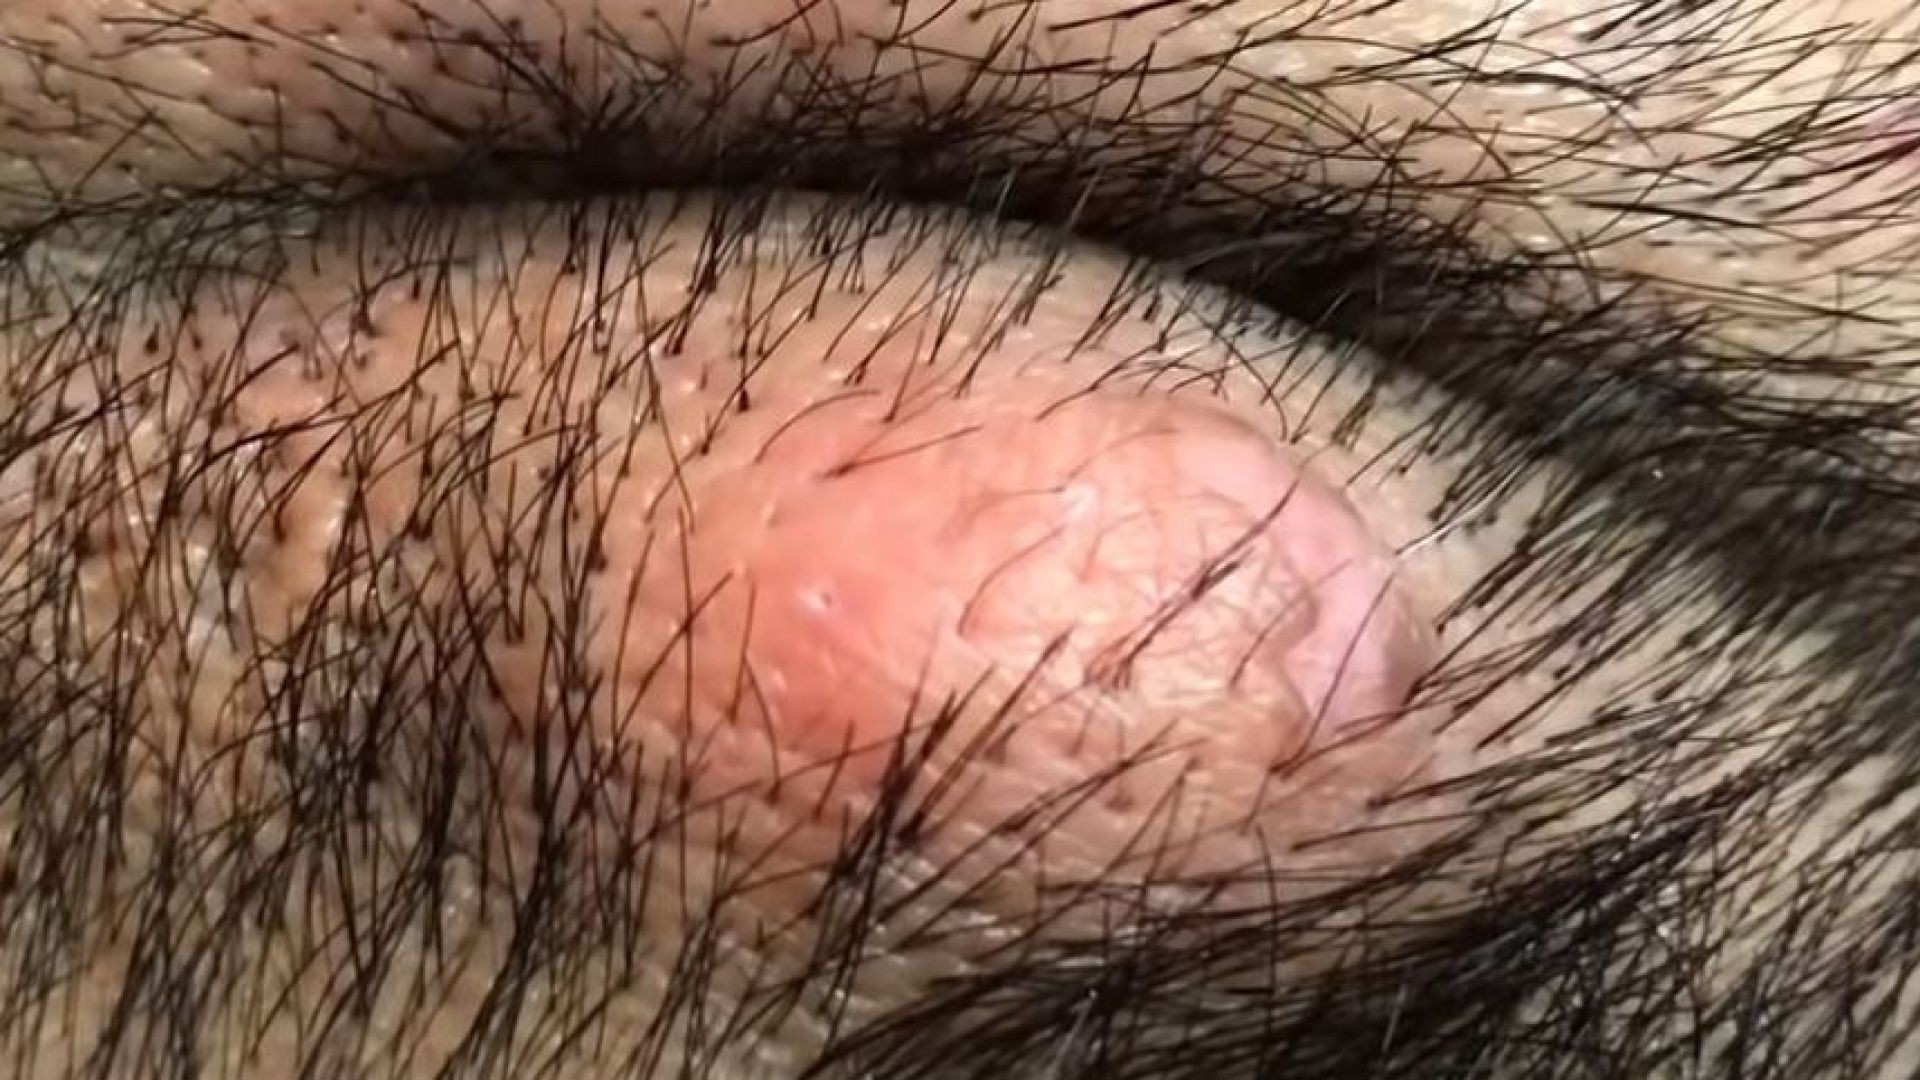 Giant cyst popping